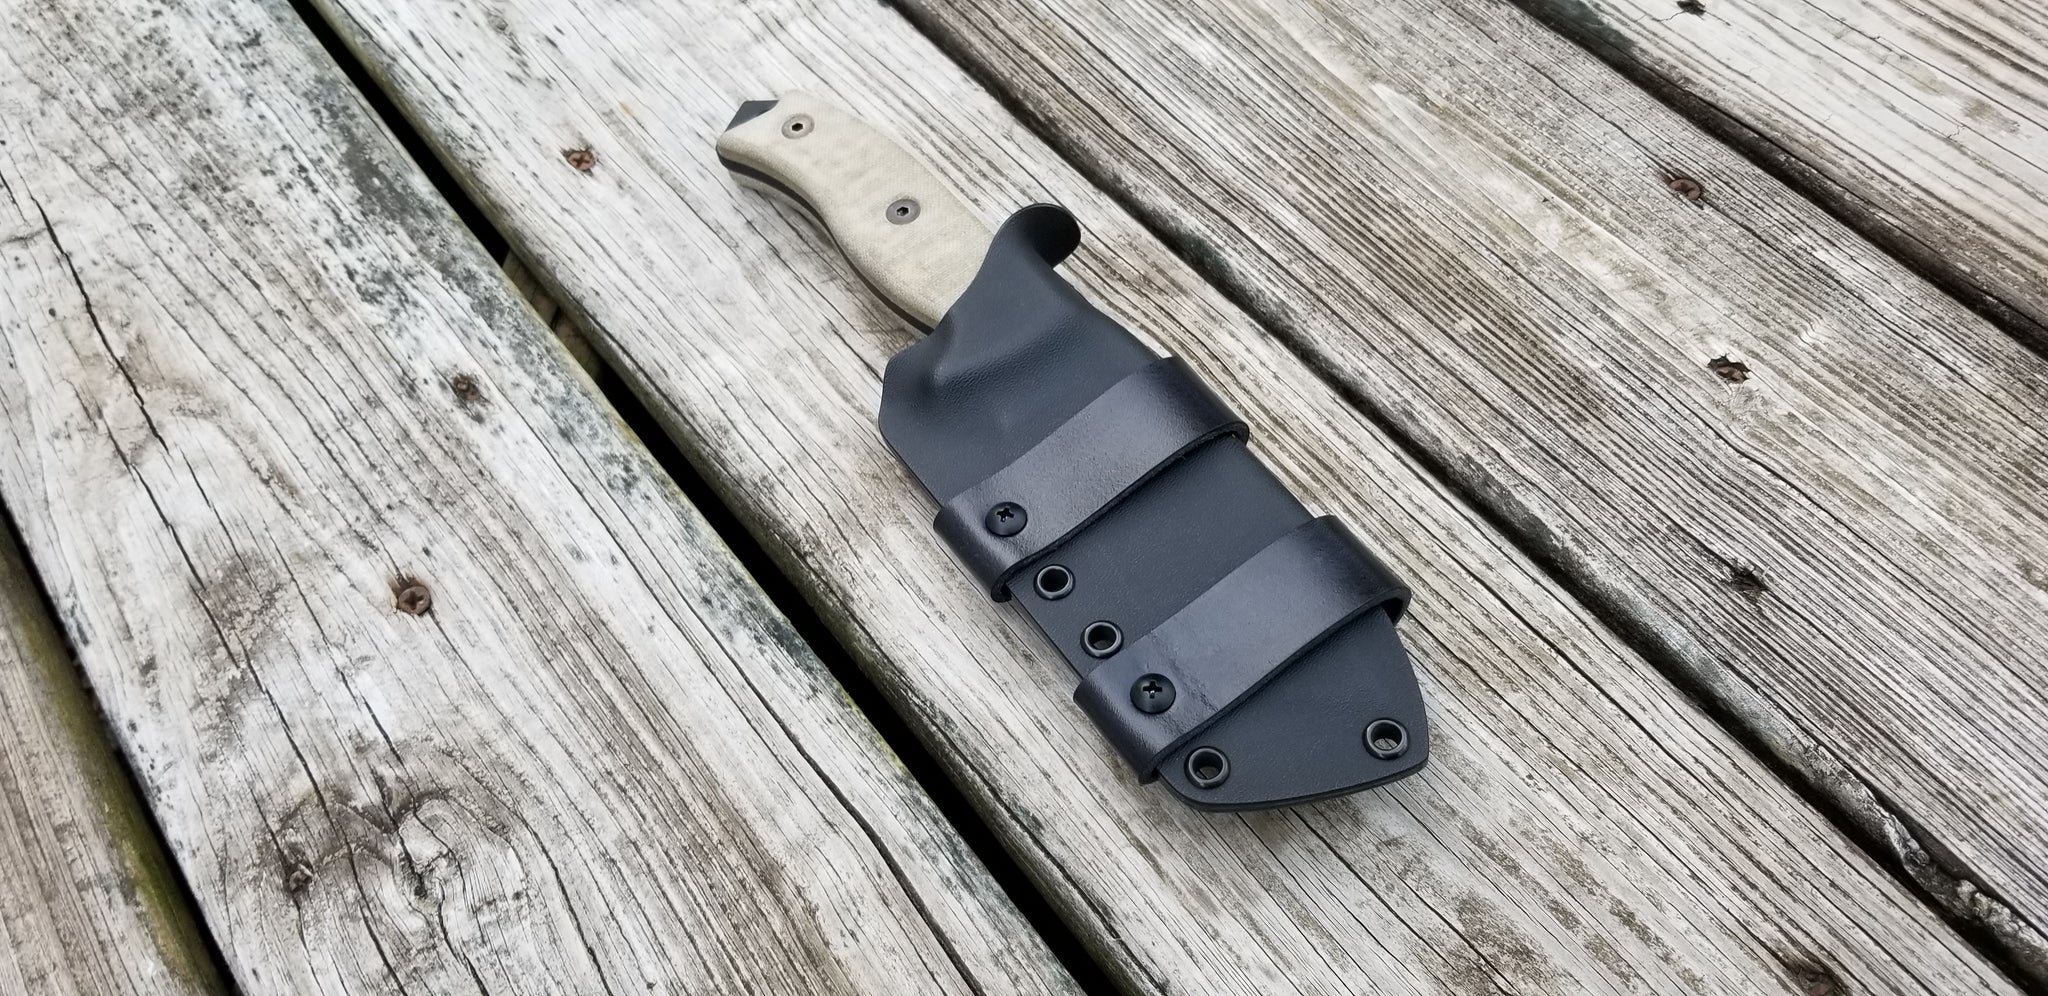 Ontario RAT-5 Taco Style kydex sheath, pair of leather/Double snap scout carry loops